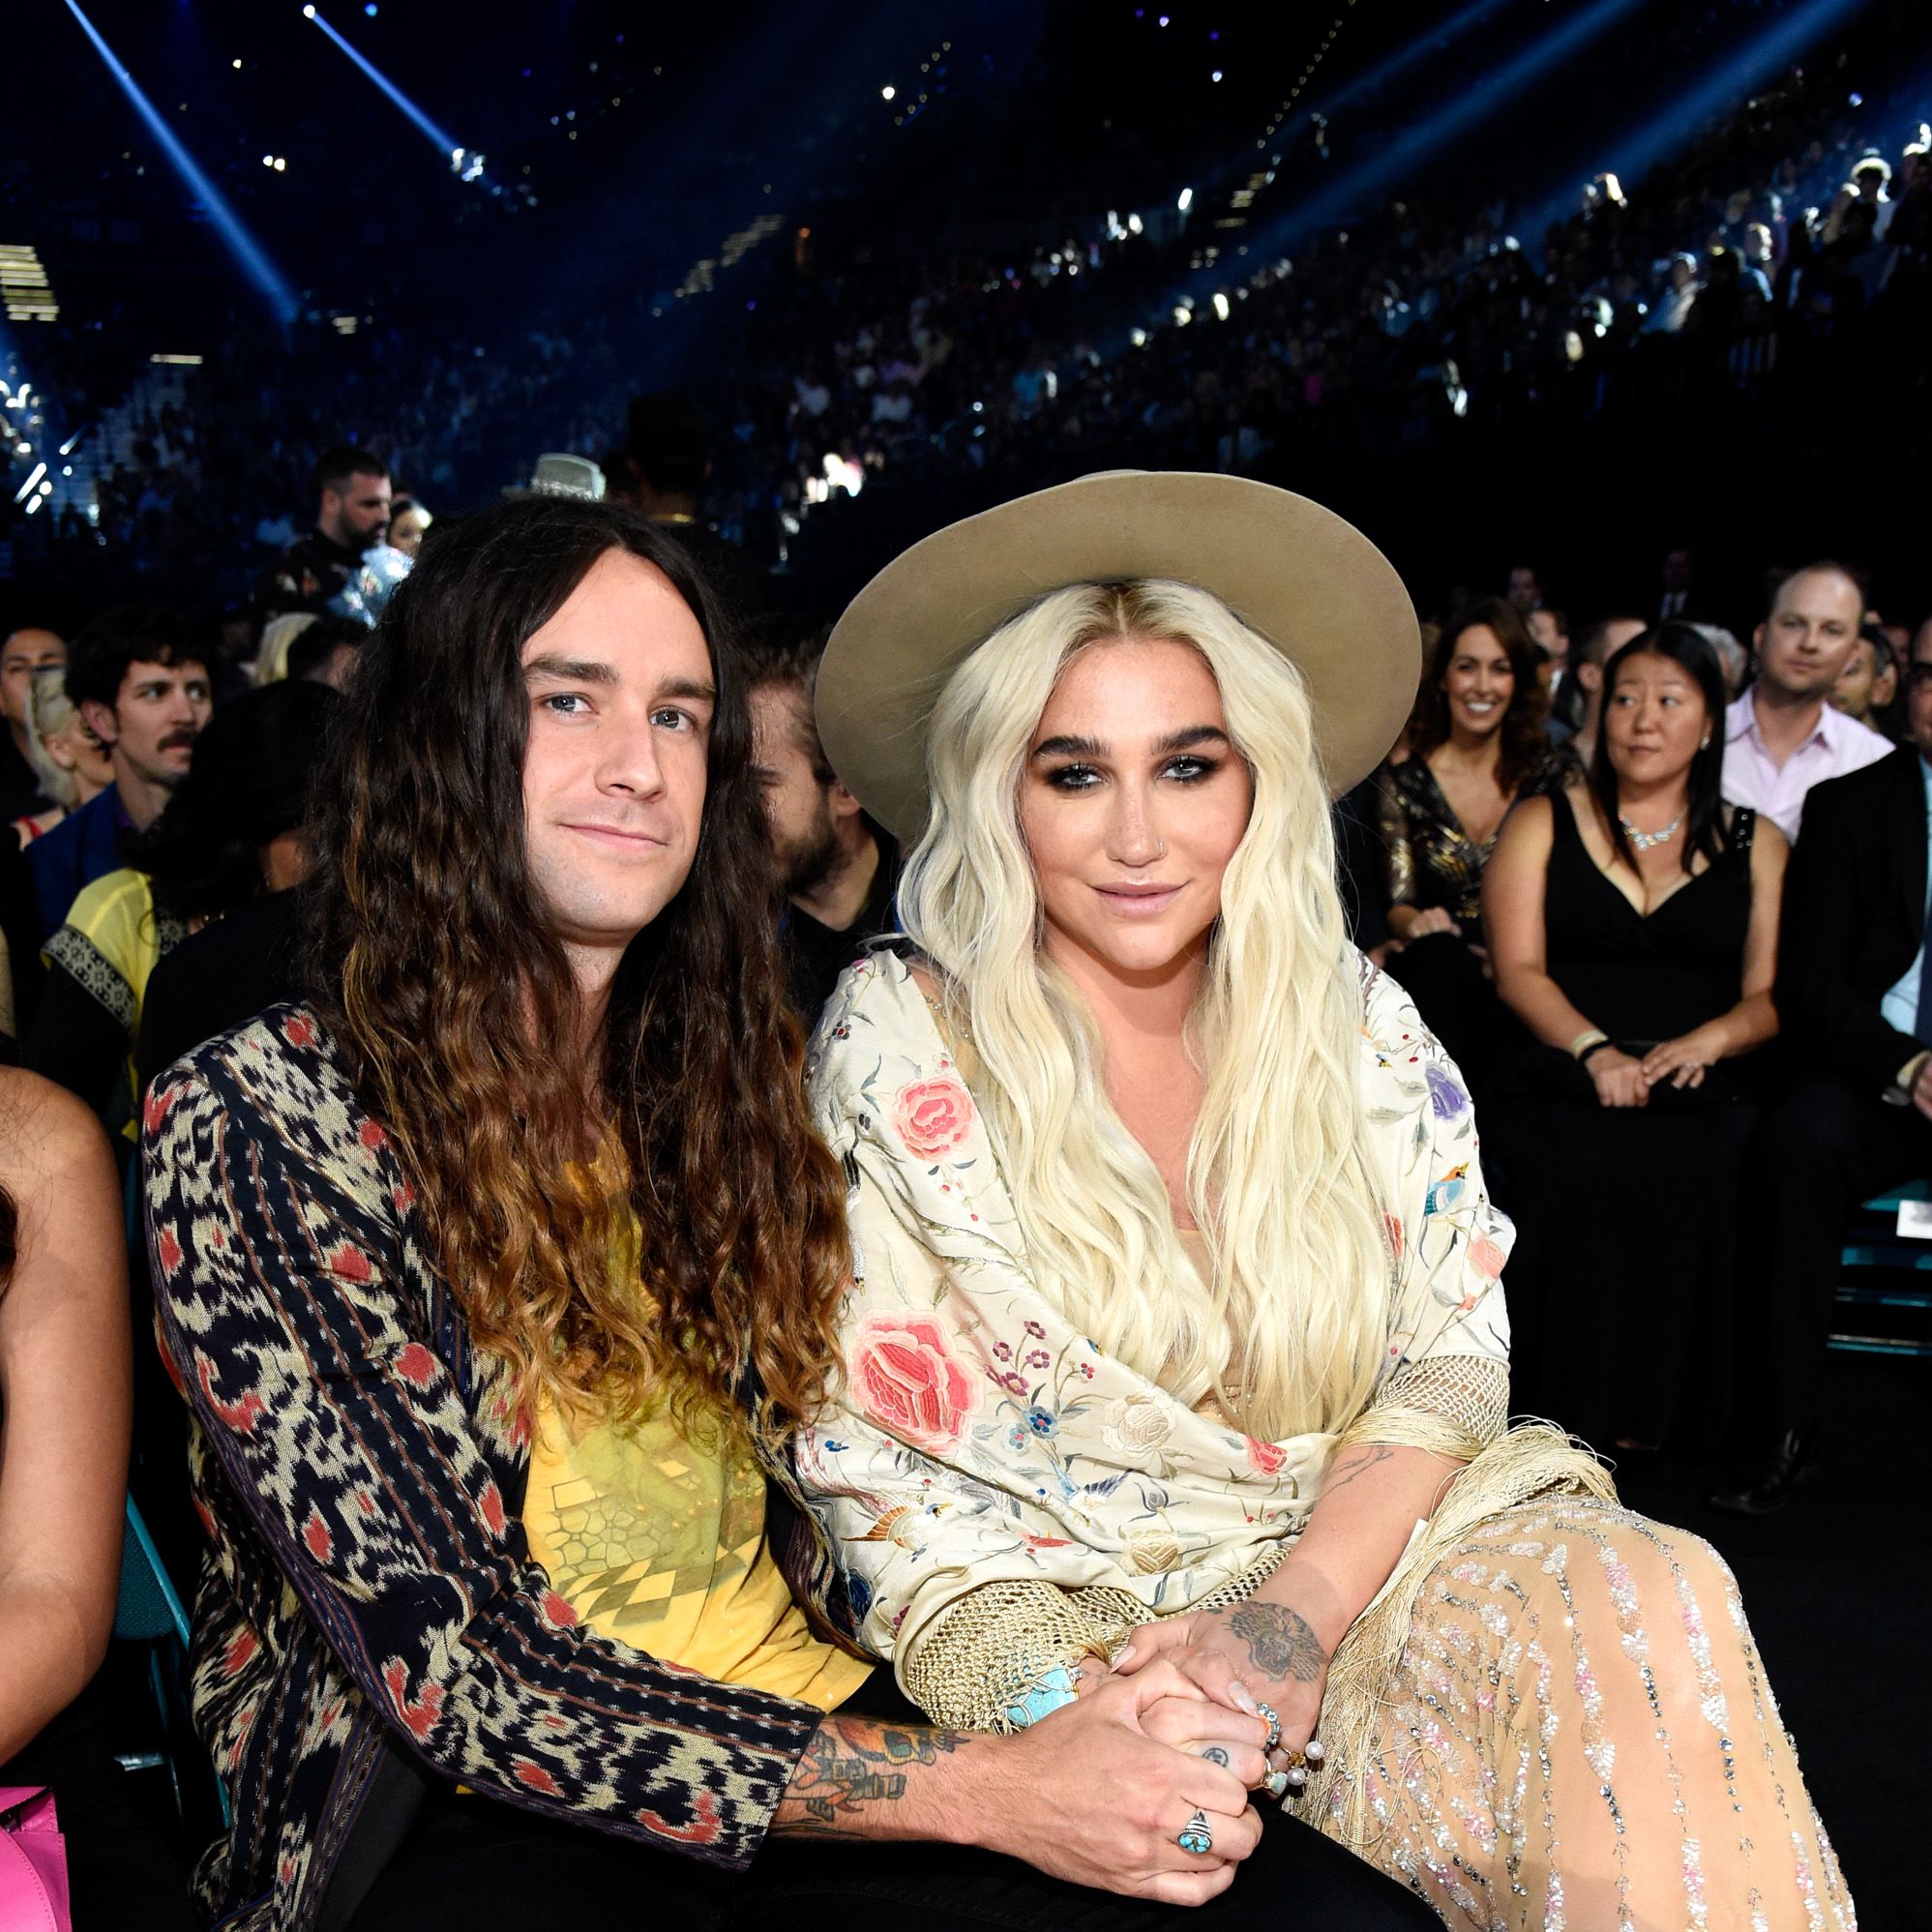 Brad Ashenfelter wearing a yellow shirt and patterned sweater and Kesha wearing a floral scarrf and nude dress